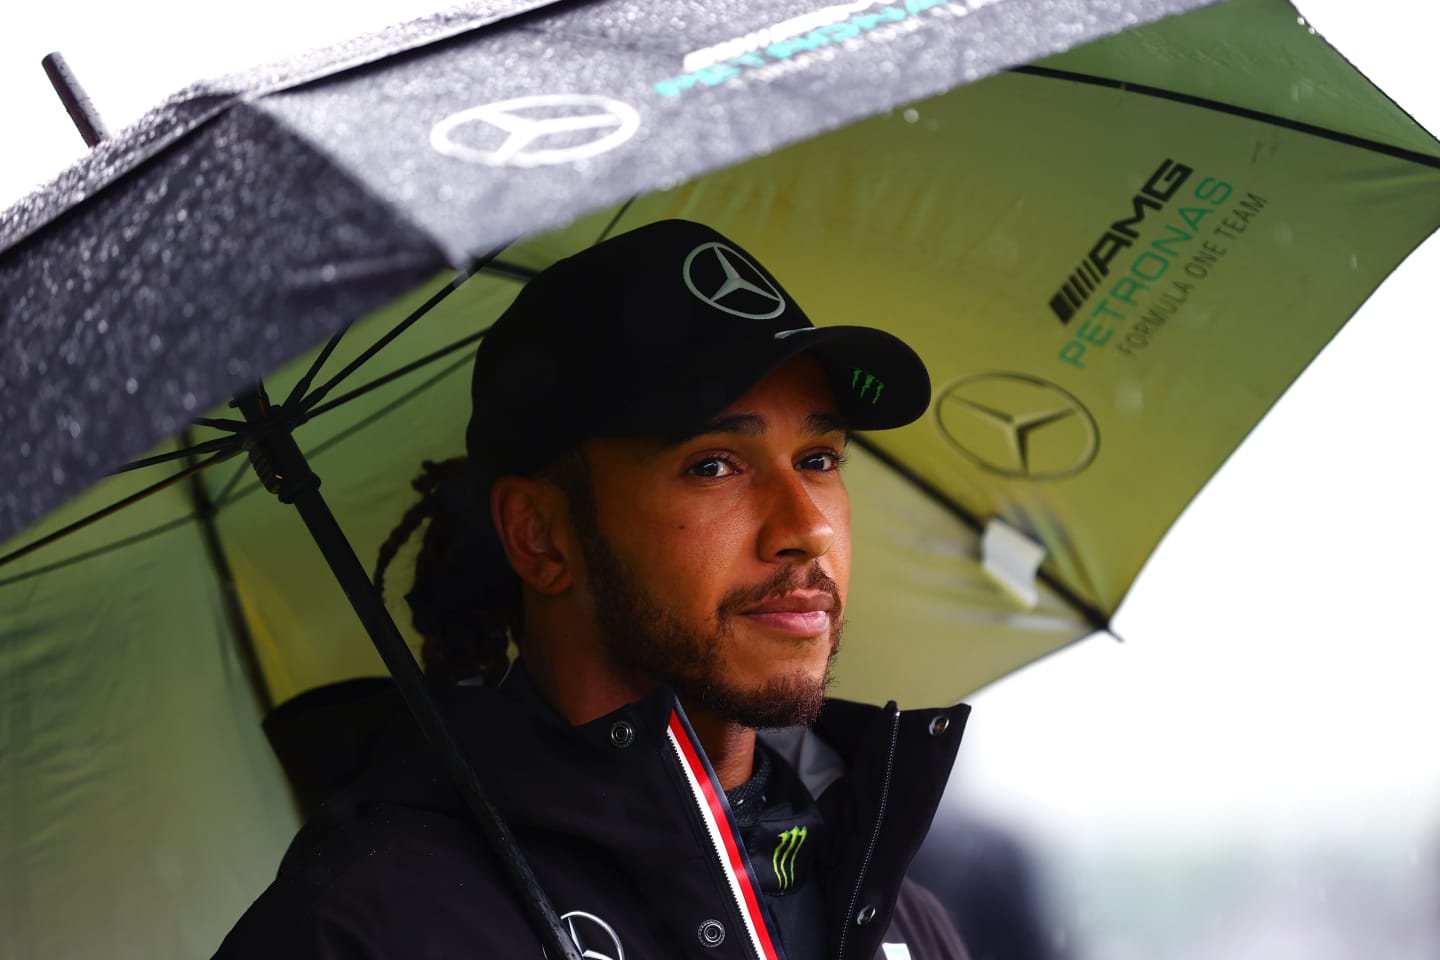 SPA, BELGIUM - AUGUST 28: Third place qualifier Lewis Hamilton of Great Britain and Mercedes GP looks on in parc ferme during qualifying ahead of the F1 Grand Prix of Belgium at Circuit de Spa-Francorchamps on August 28, 2021 in Spa, Belgium. (Photo by Dan Istitene - Formula 1/Formula 1 via Getty Images)